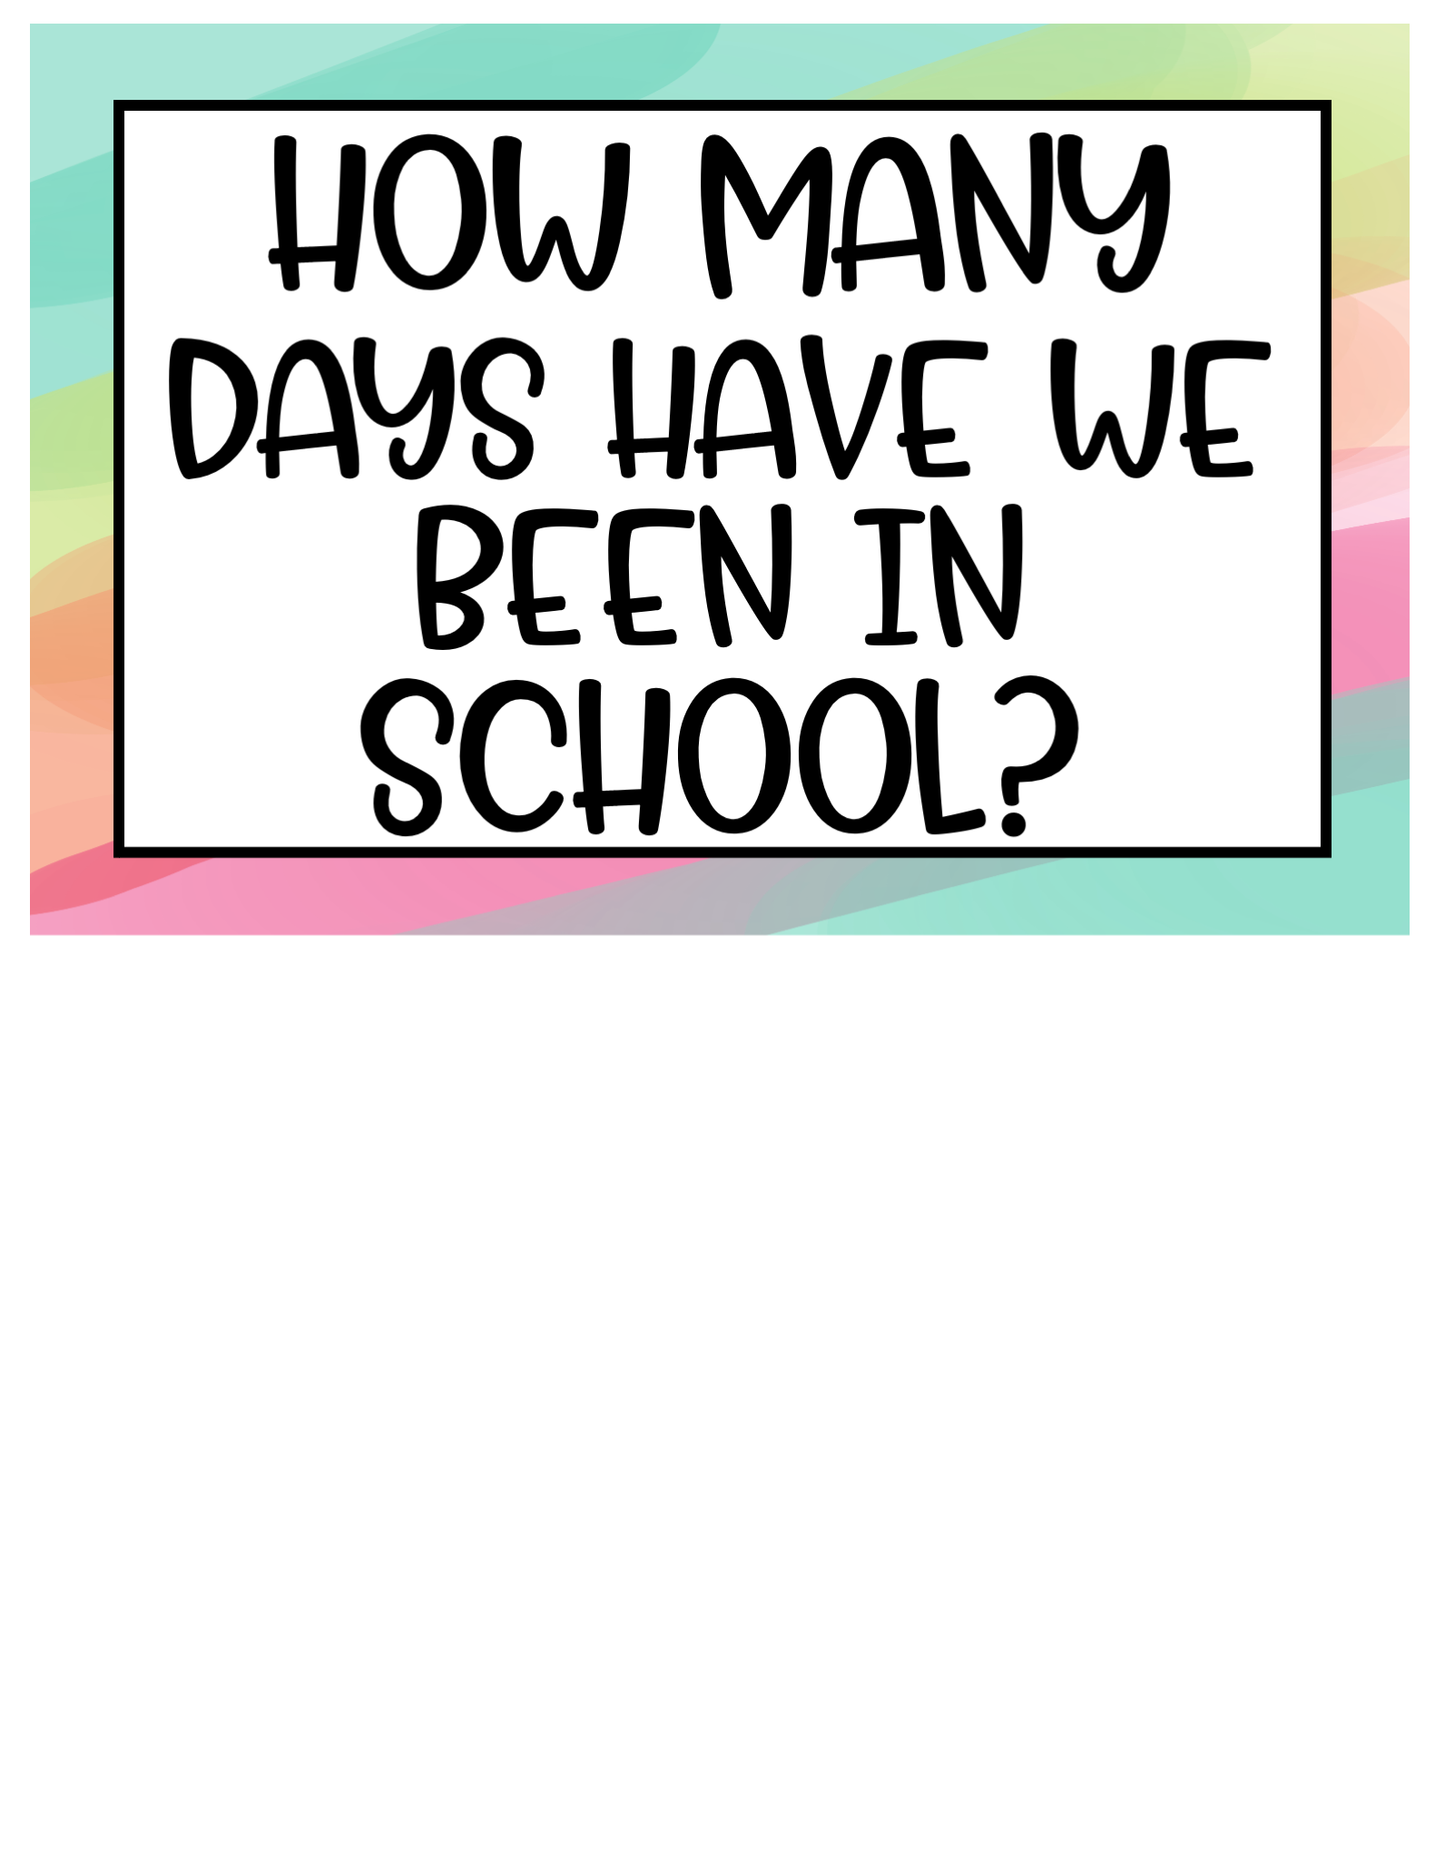 How Many Days in School Counting Set | Happy Bright